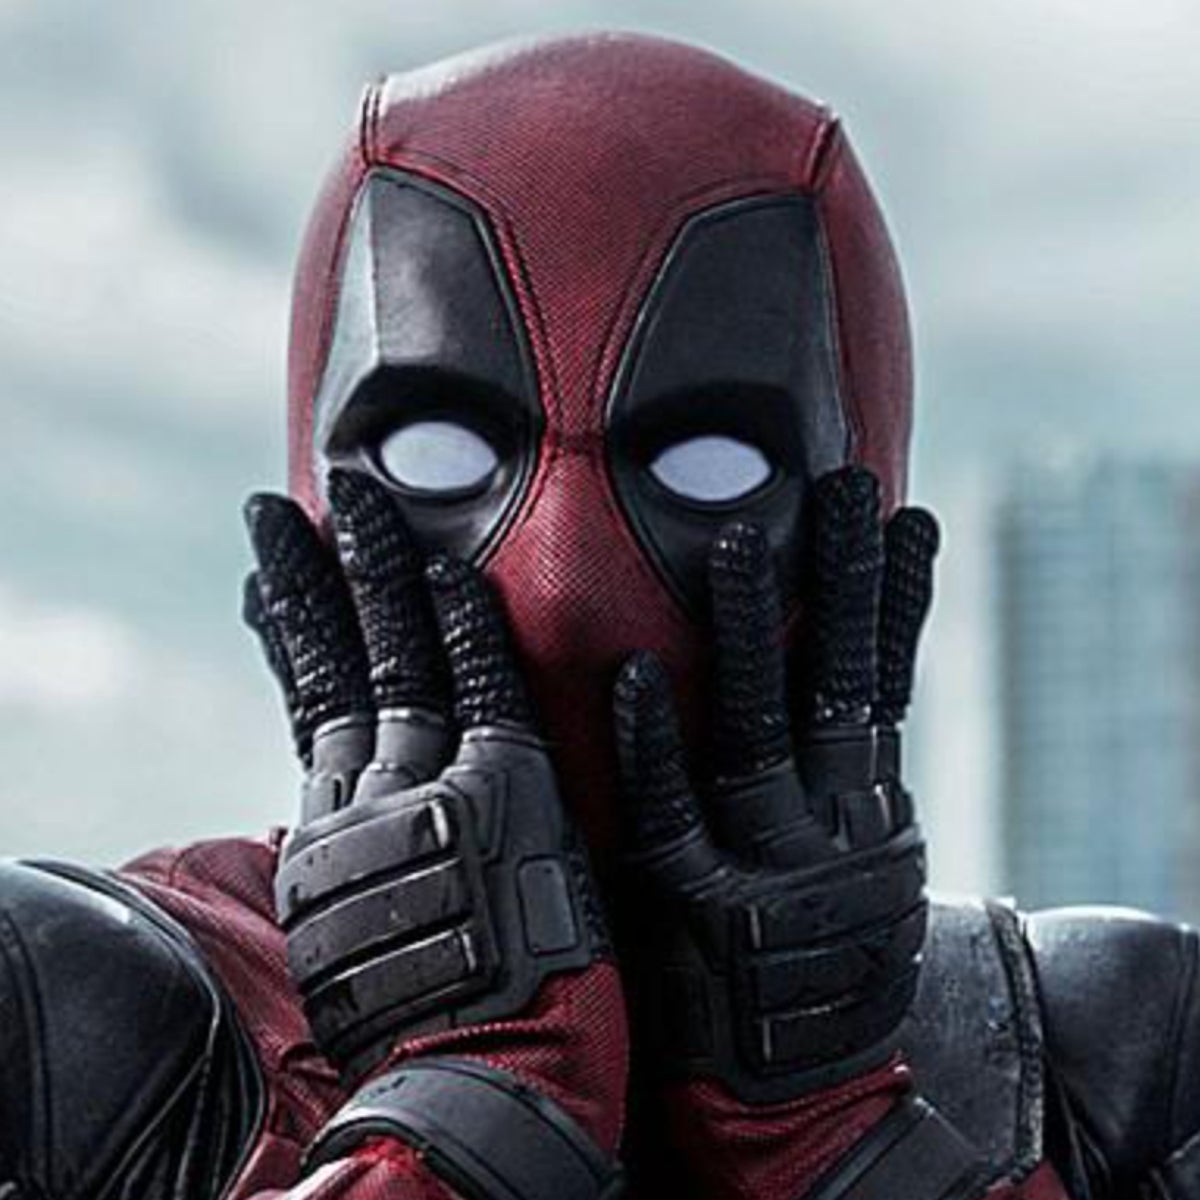 Ryan Reynolds And Morena Baccarin In Deadpool Wallpapers